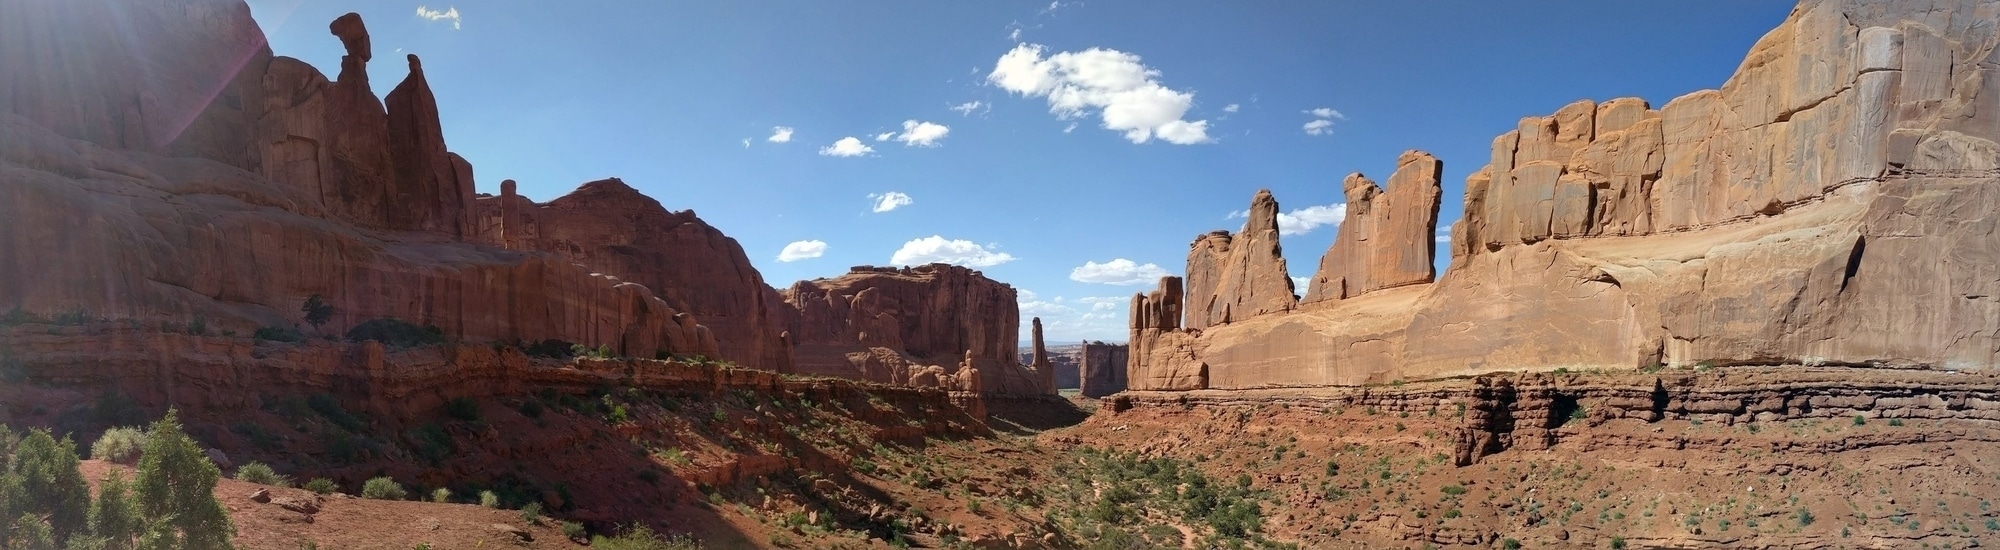 arches pano 01